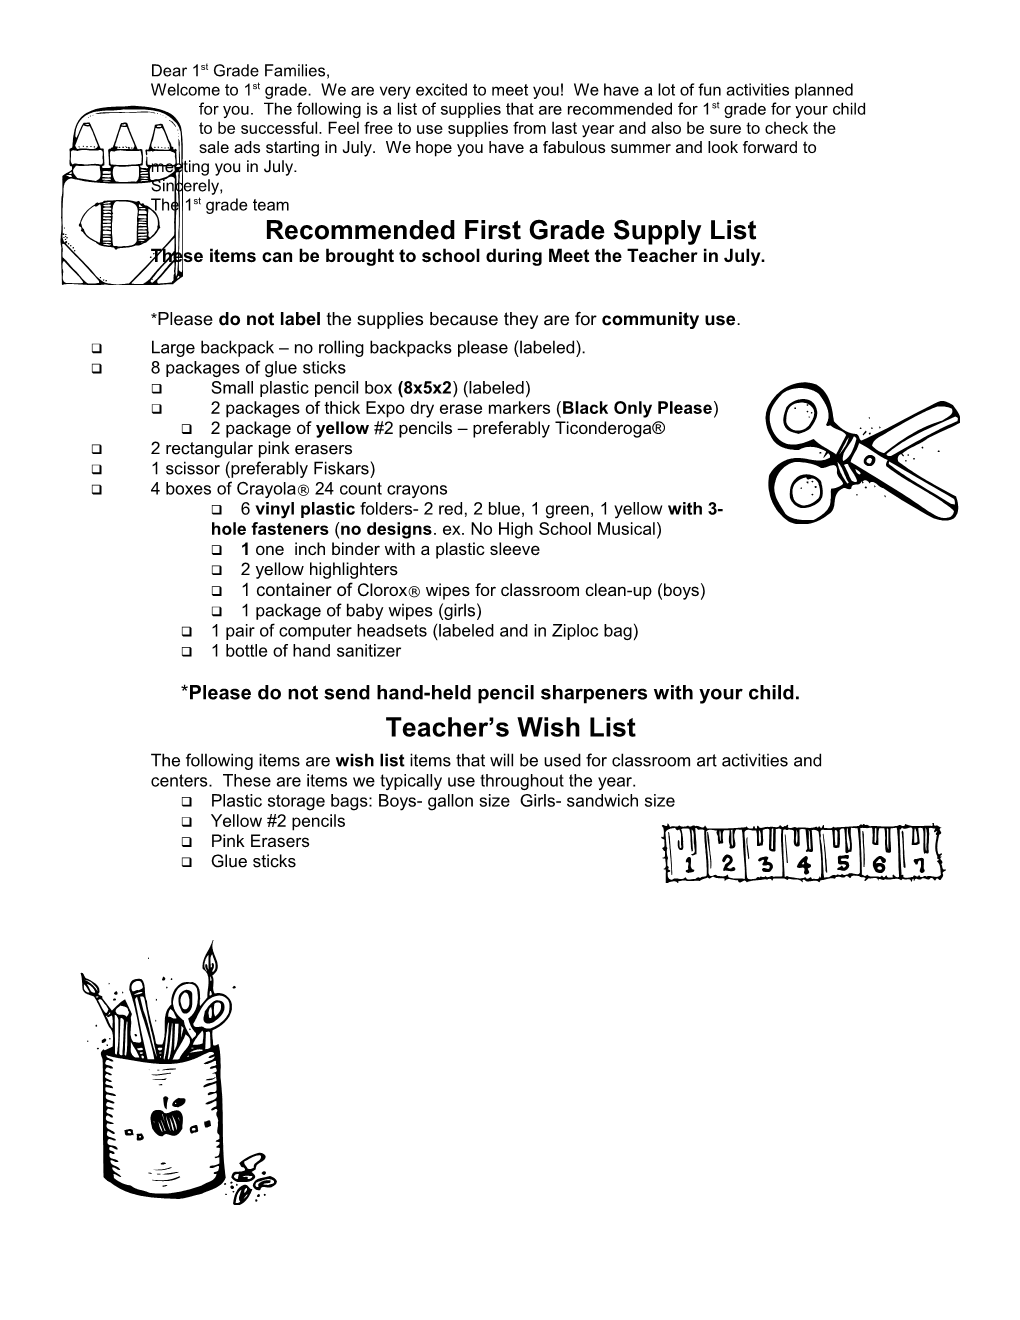 Recommended First Grade Supply List